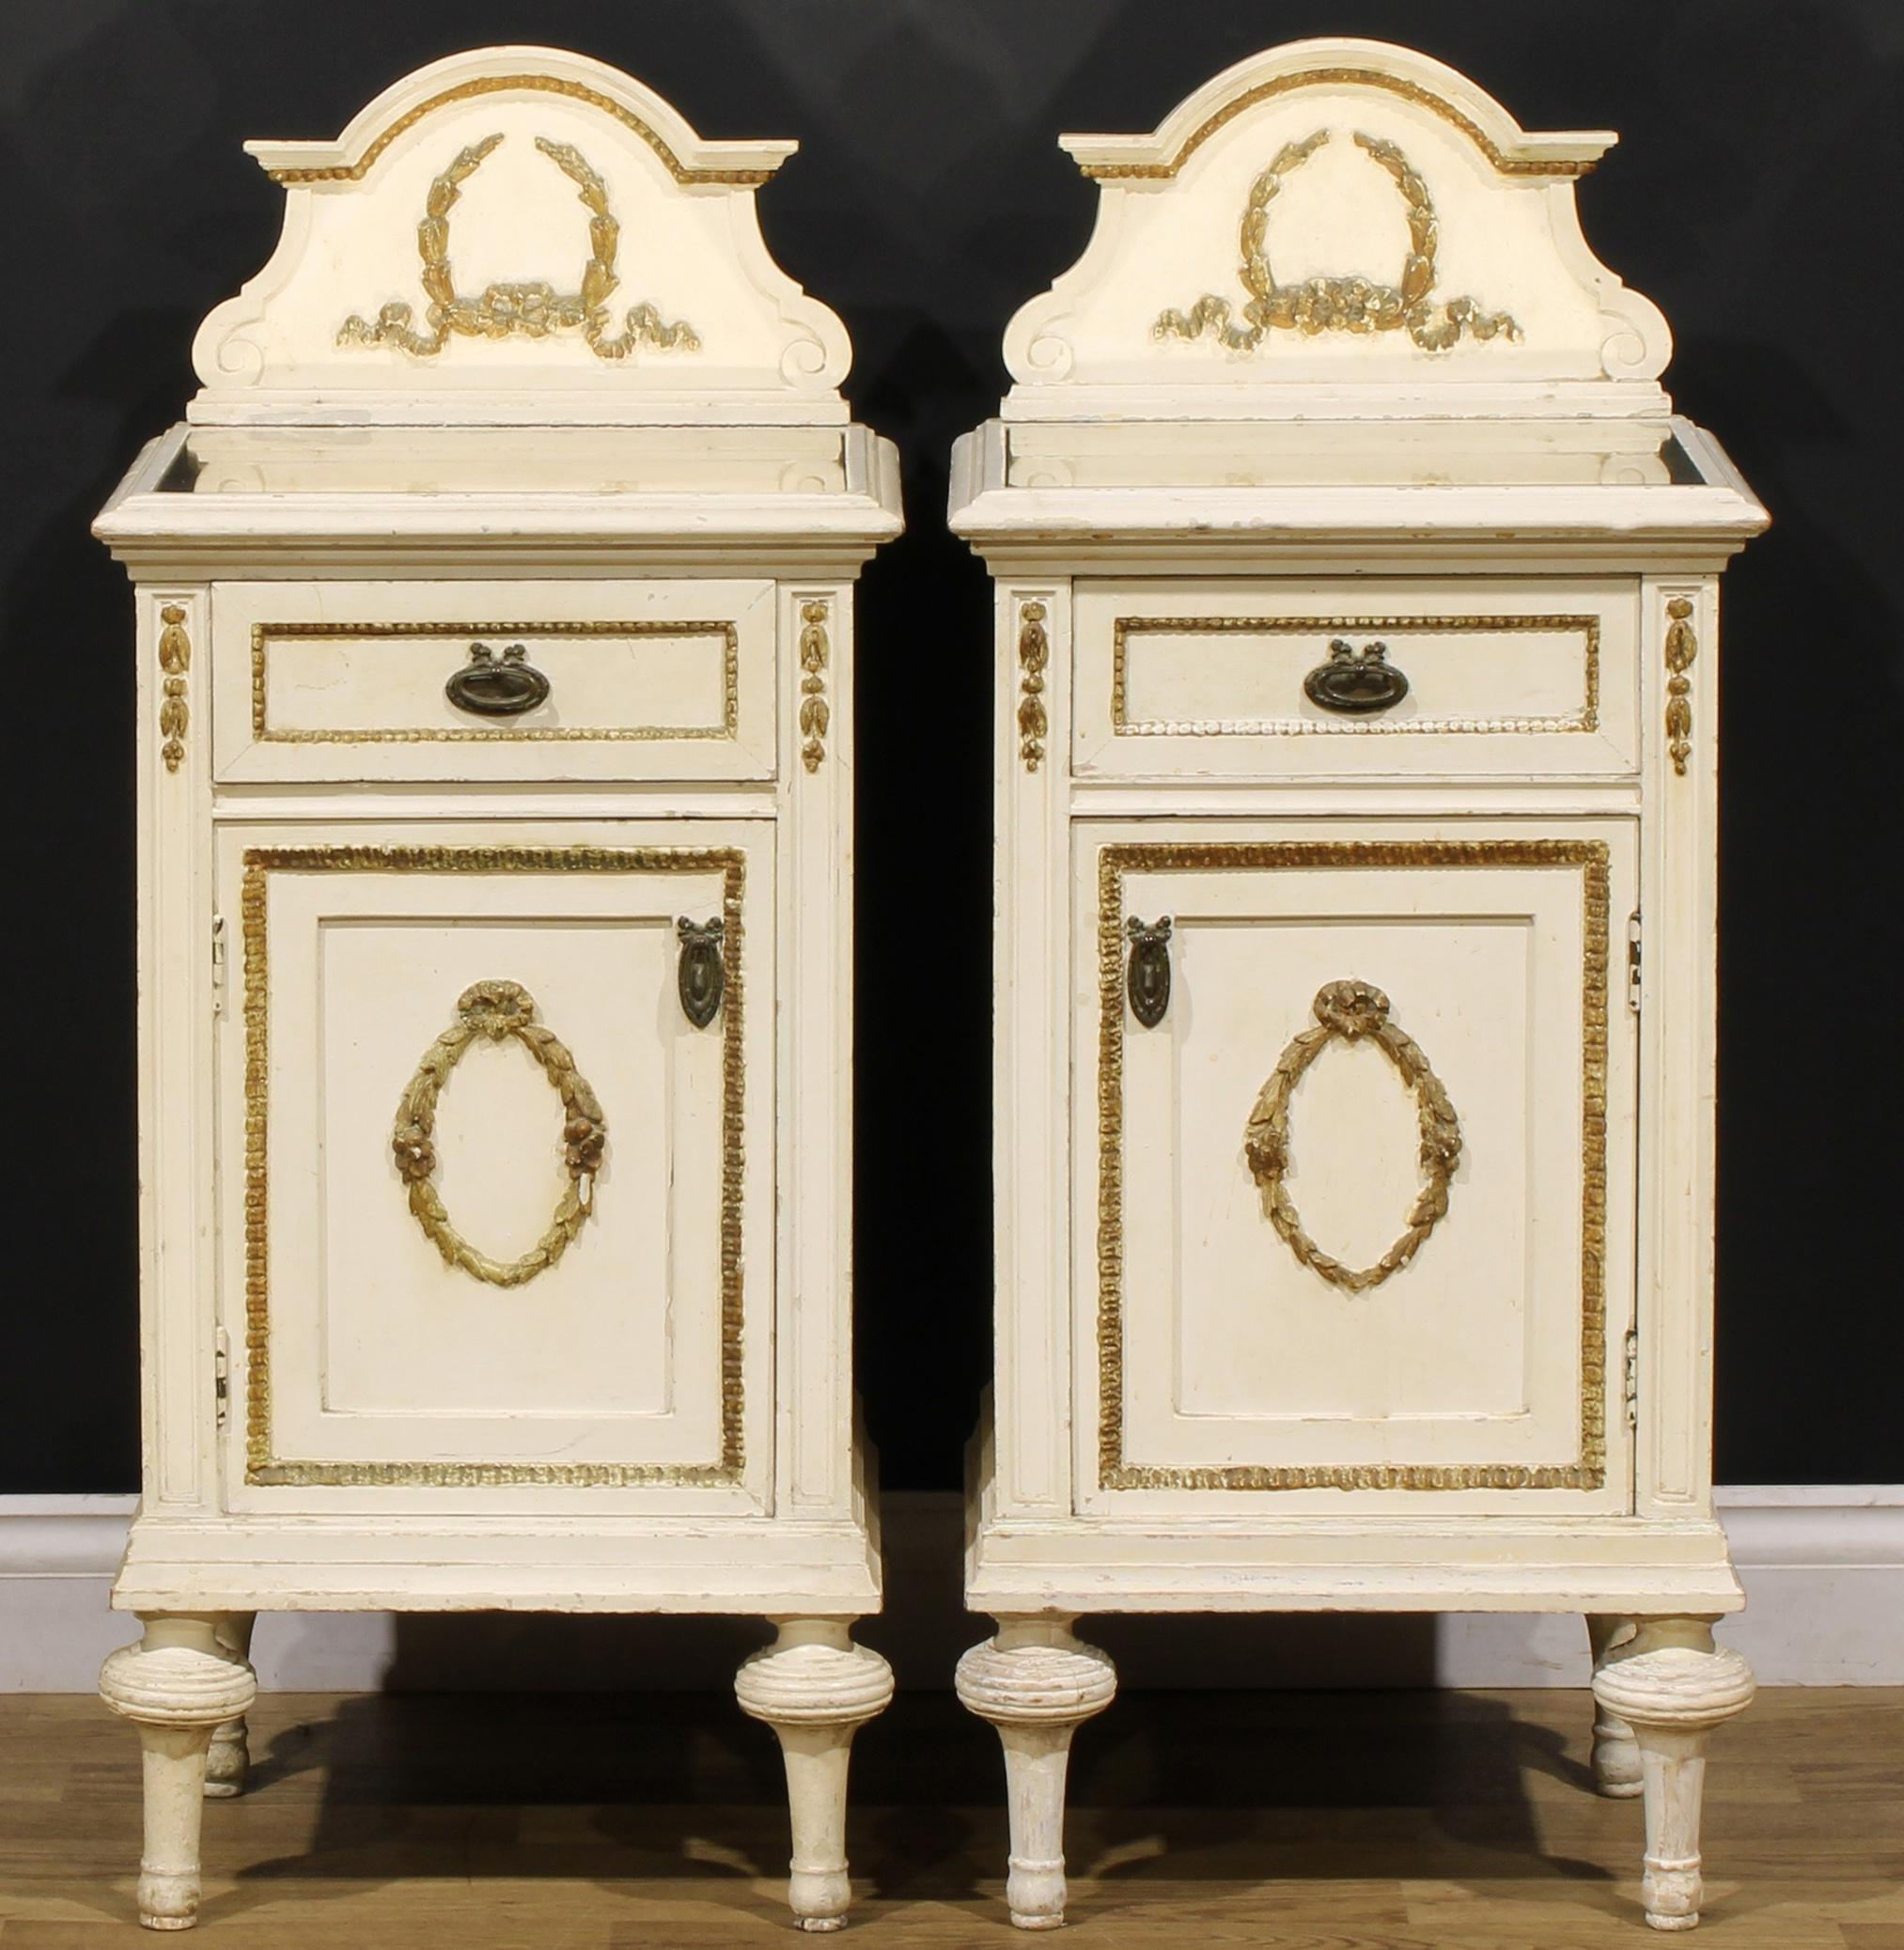 A Pair Of Matching French Louis XVI Rustic Style Shabby Chic Painted Bedroom Nightstand Cabinets, Each With A Single Drawer & Cabinet Drawer.

Tops featured glass.